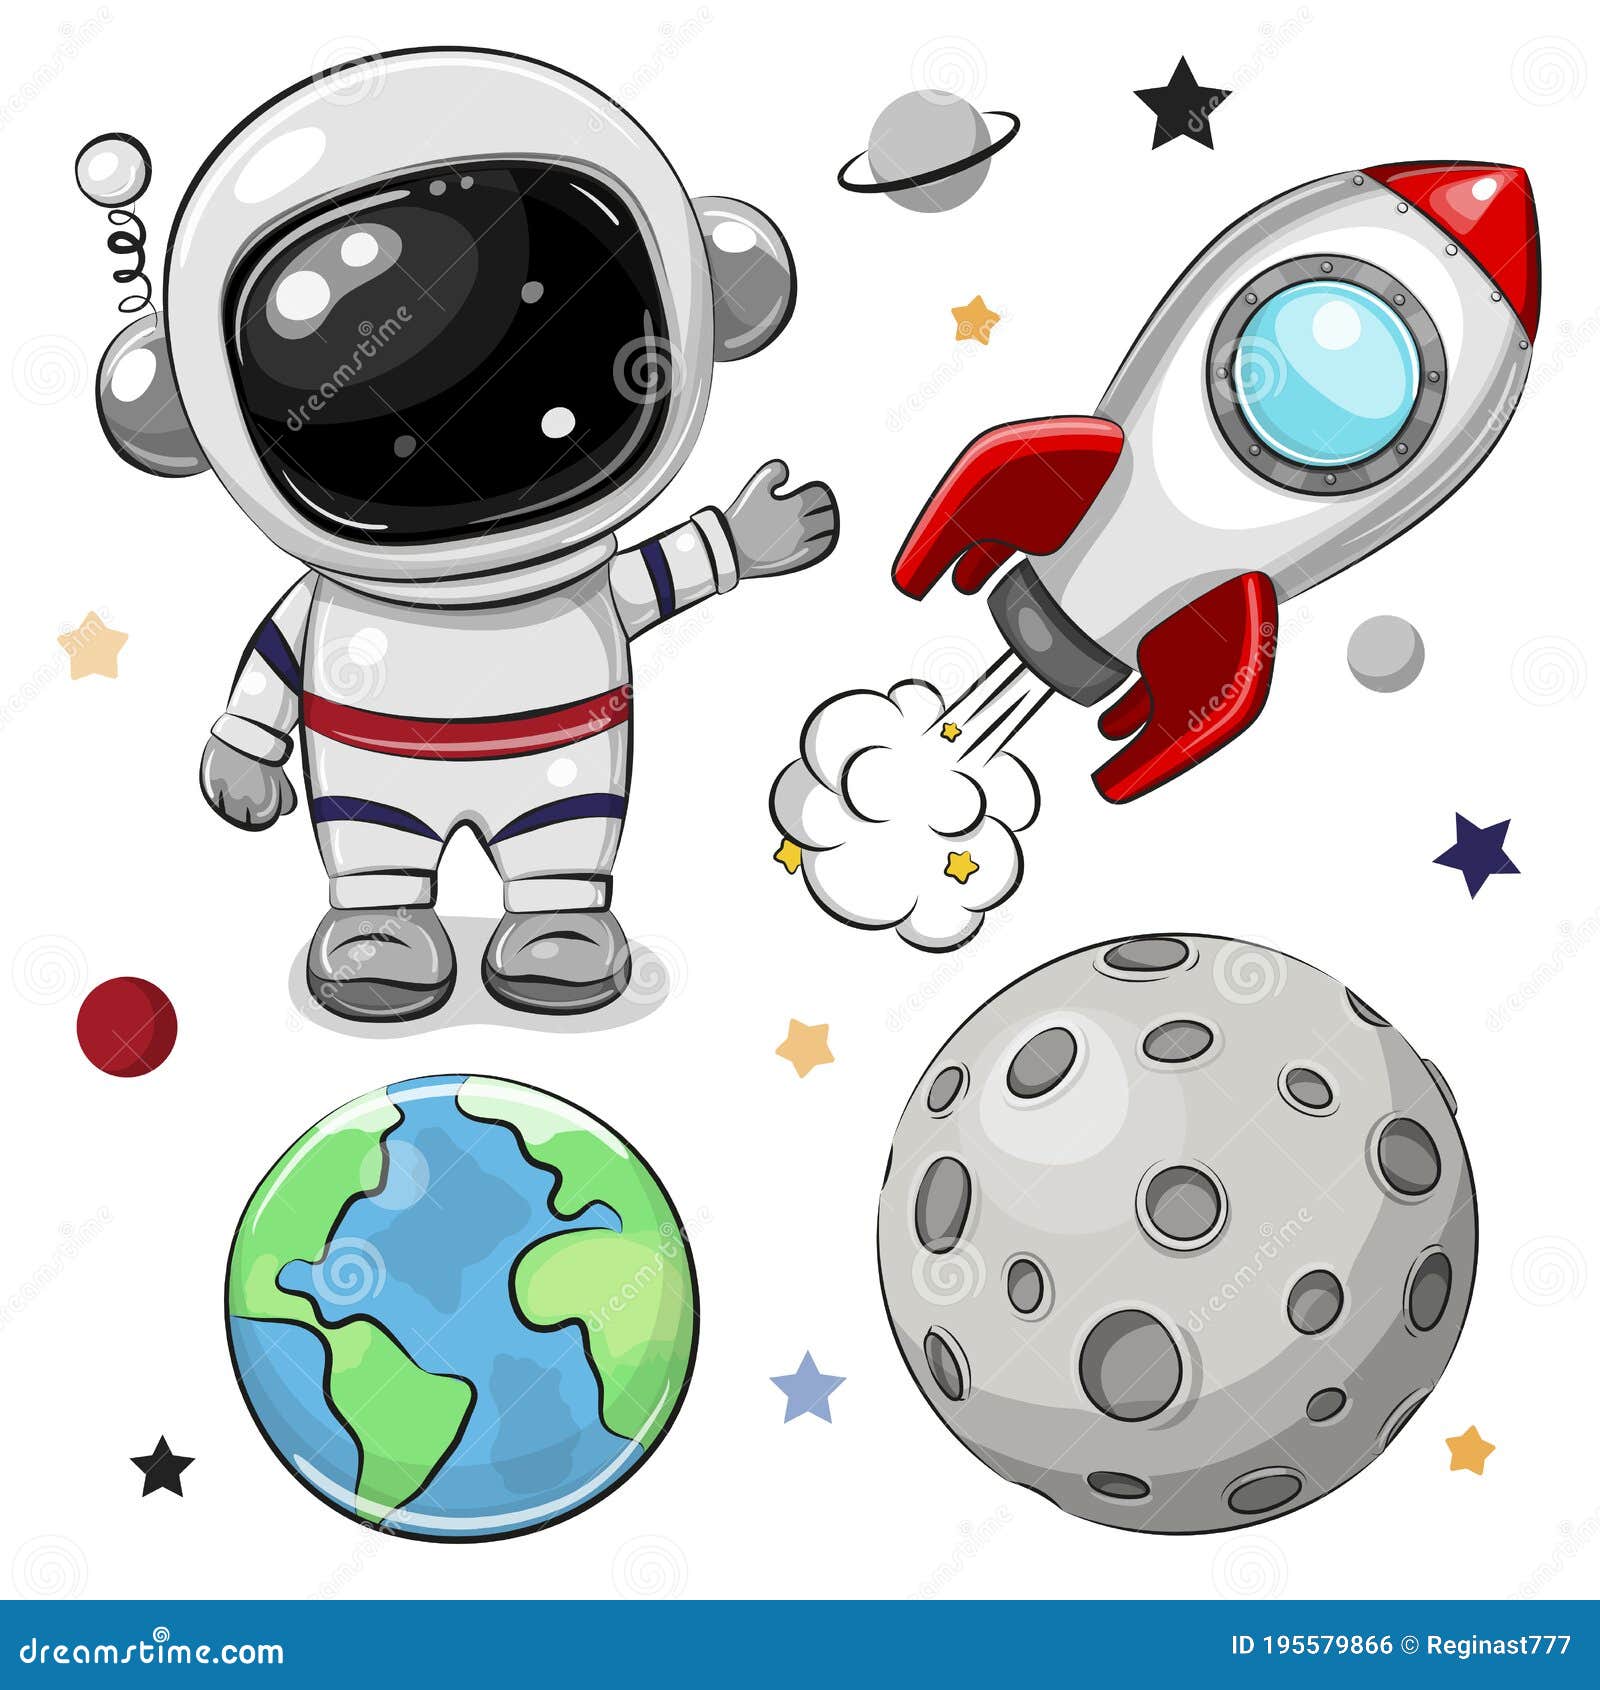 space set of astronaut, rocket and planets